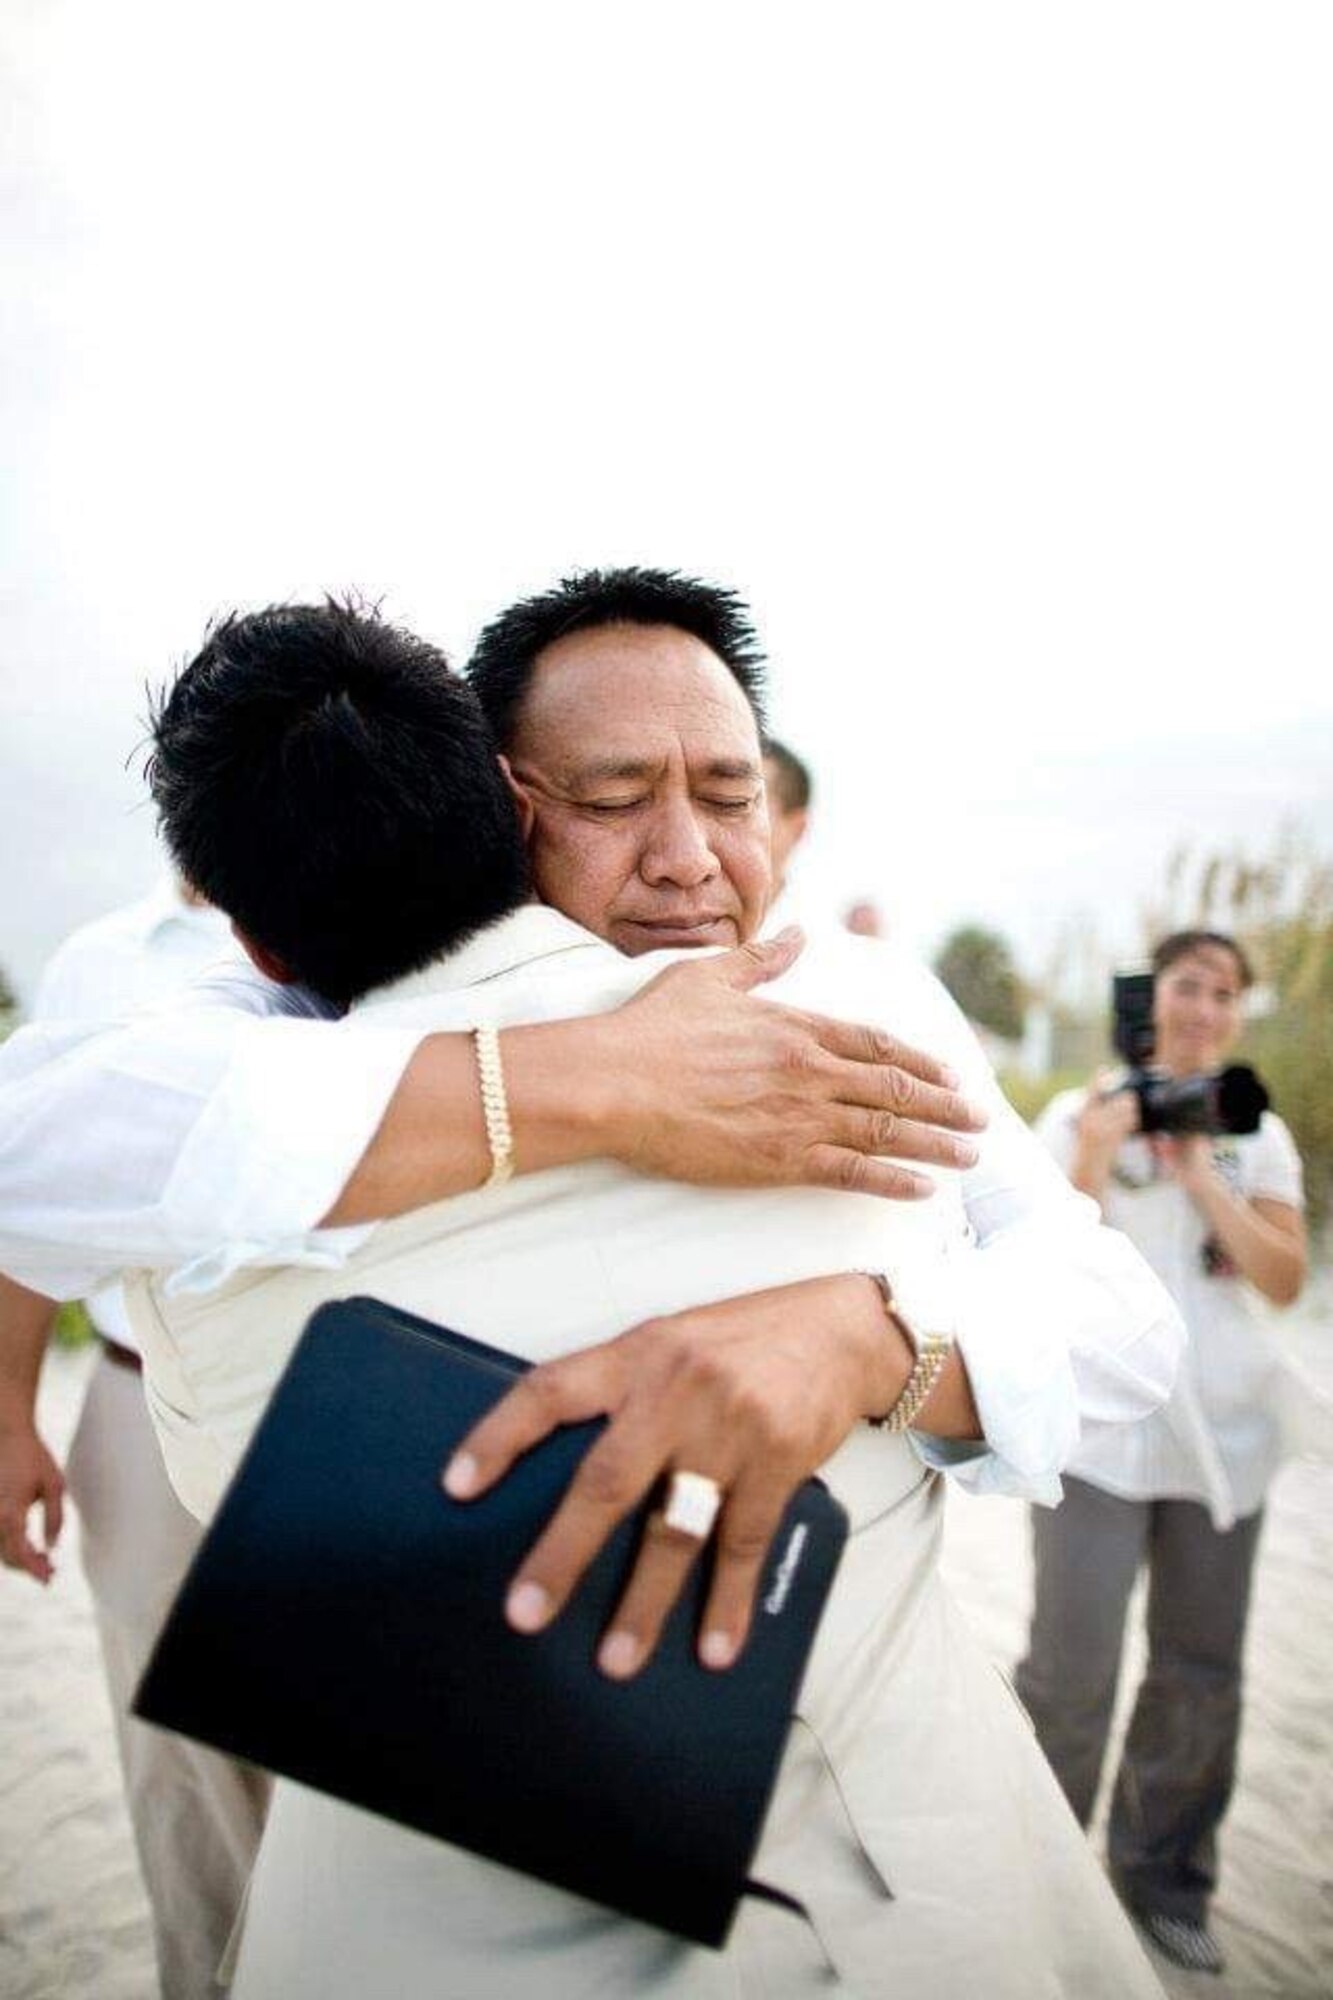 U.S. Air Force Capt. Genesis Guerrero, now a chaplain for the 39th Air Base Wing, (front) receives a hug from his father, Gene (face shown), on his wedding day, Aug. 1, 2009, at St. Augustine, Fla. As a chaplain, Guerrero draws inspiration from his experience in forgiving his father’s troubled lifestyle, and seeks to help Airmen find peace through forgiveness and reconciliation, (Courtesy photo)